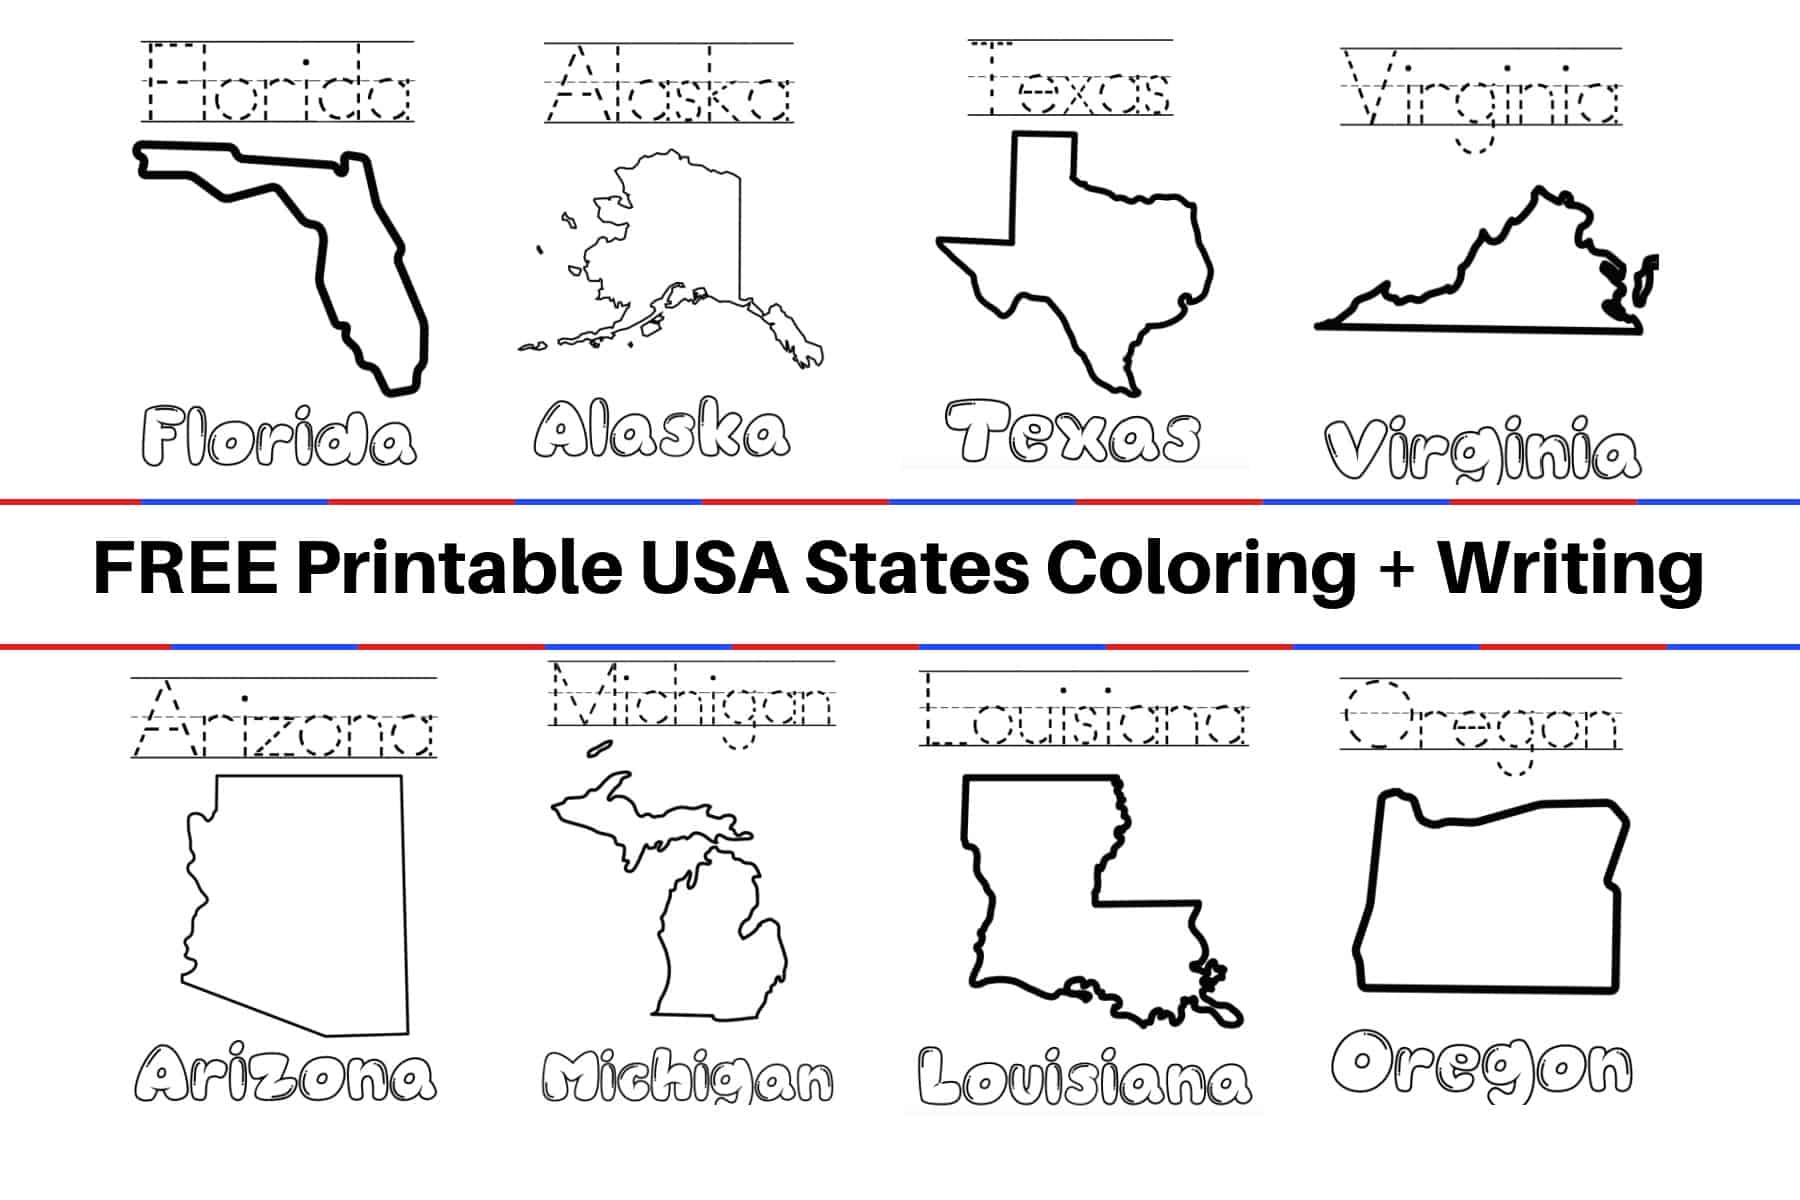 FREE United States Coloring Book and Writing Worksheets by State